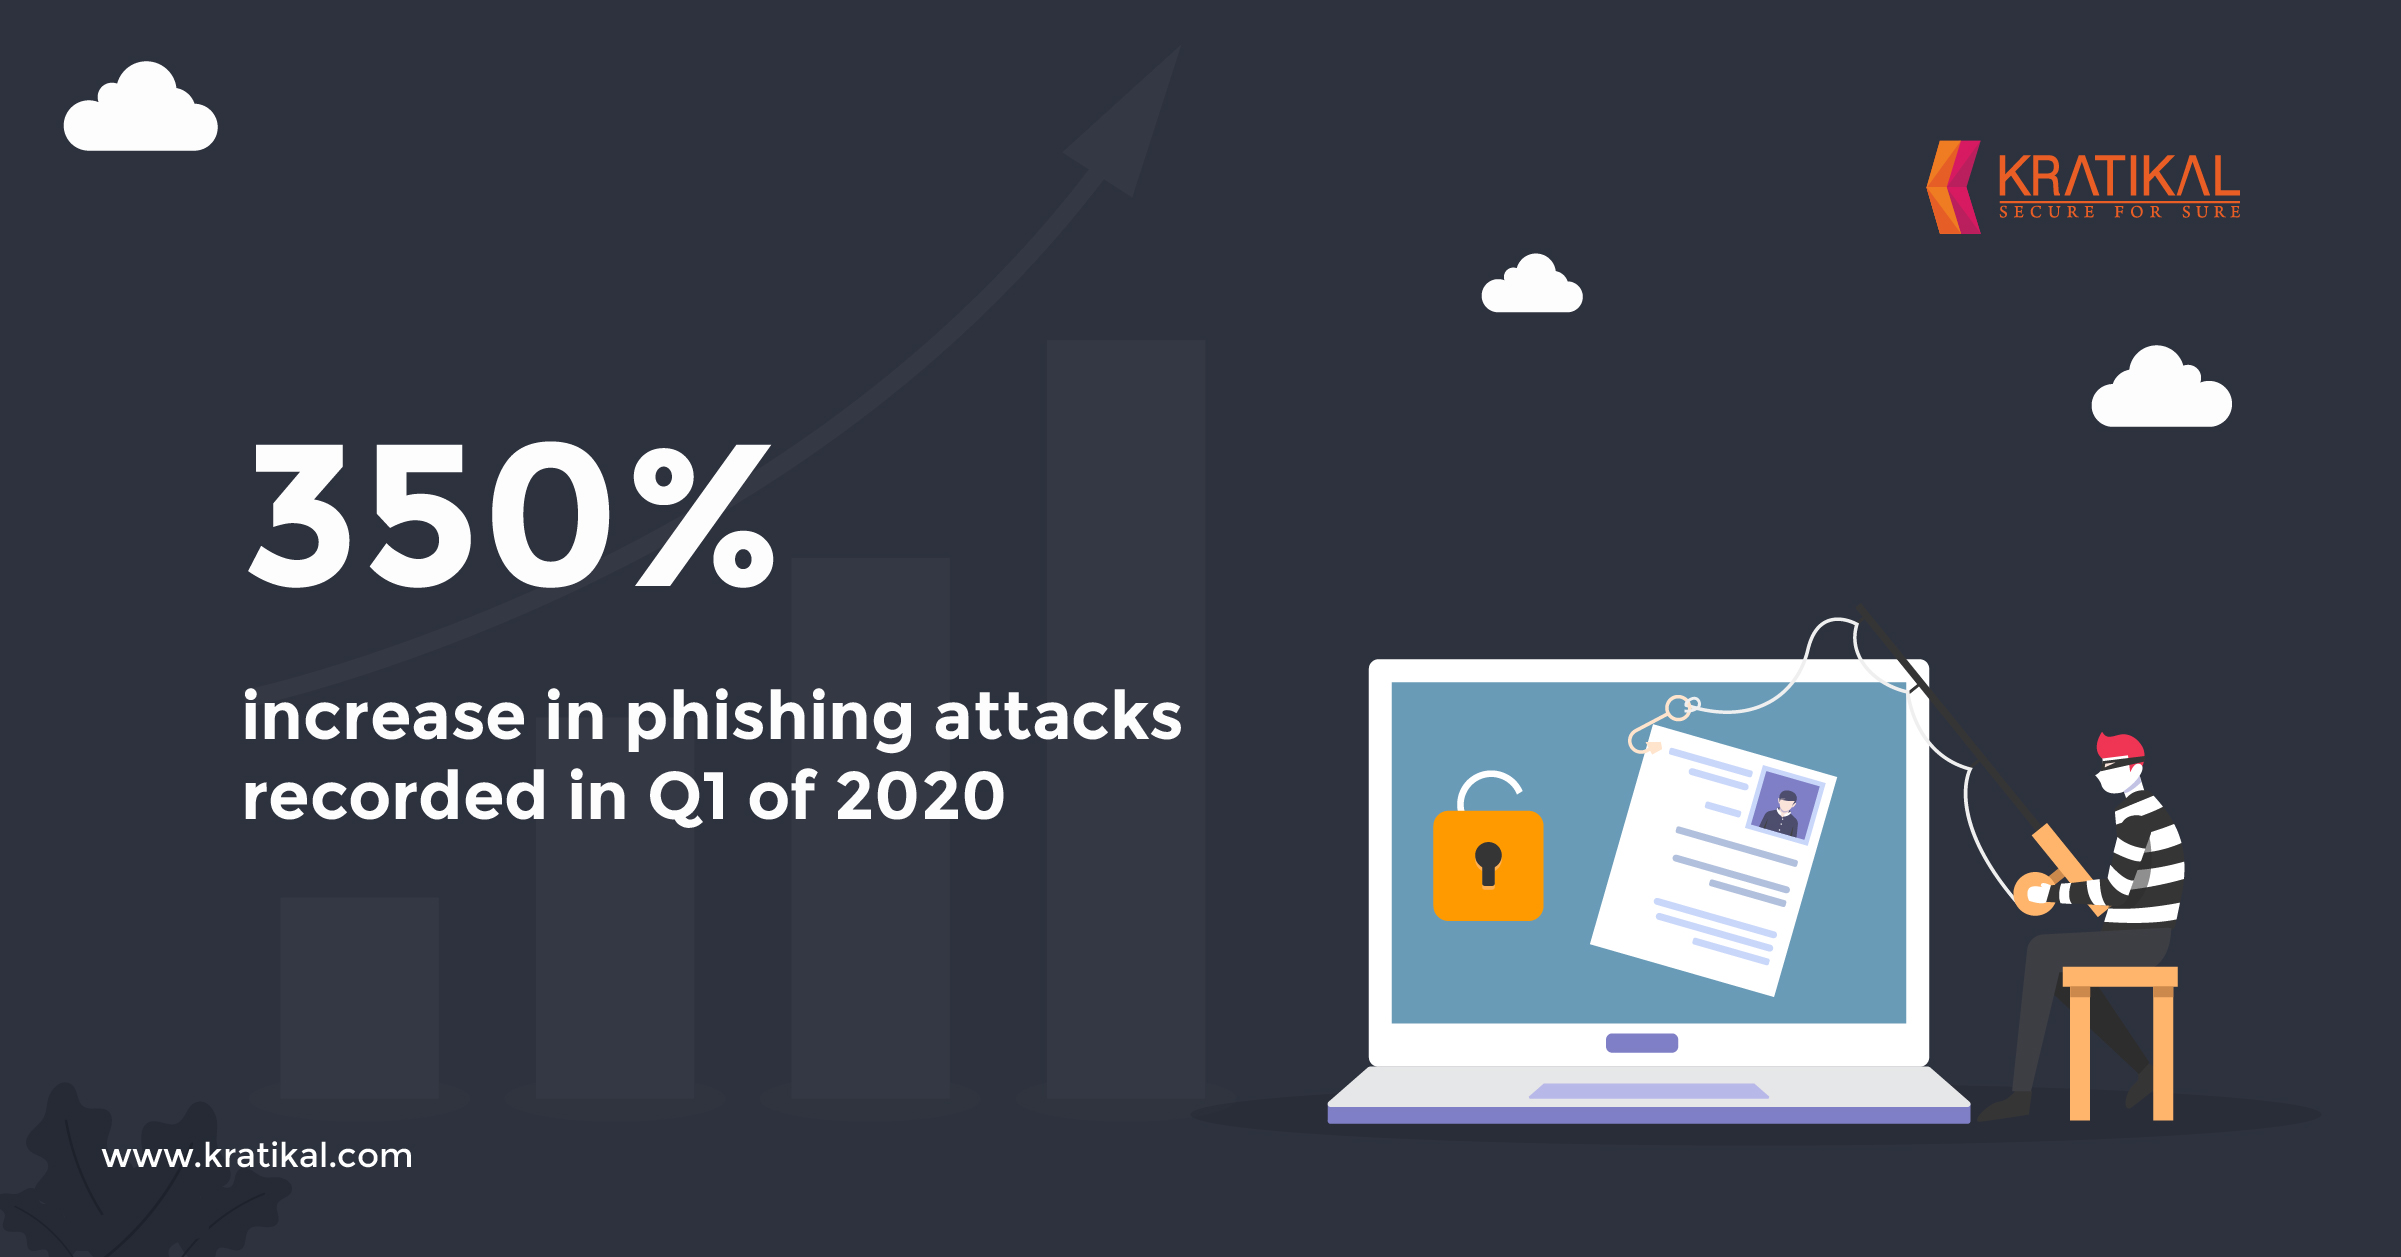 How to protect from email phishing attacks